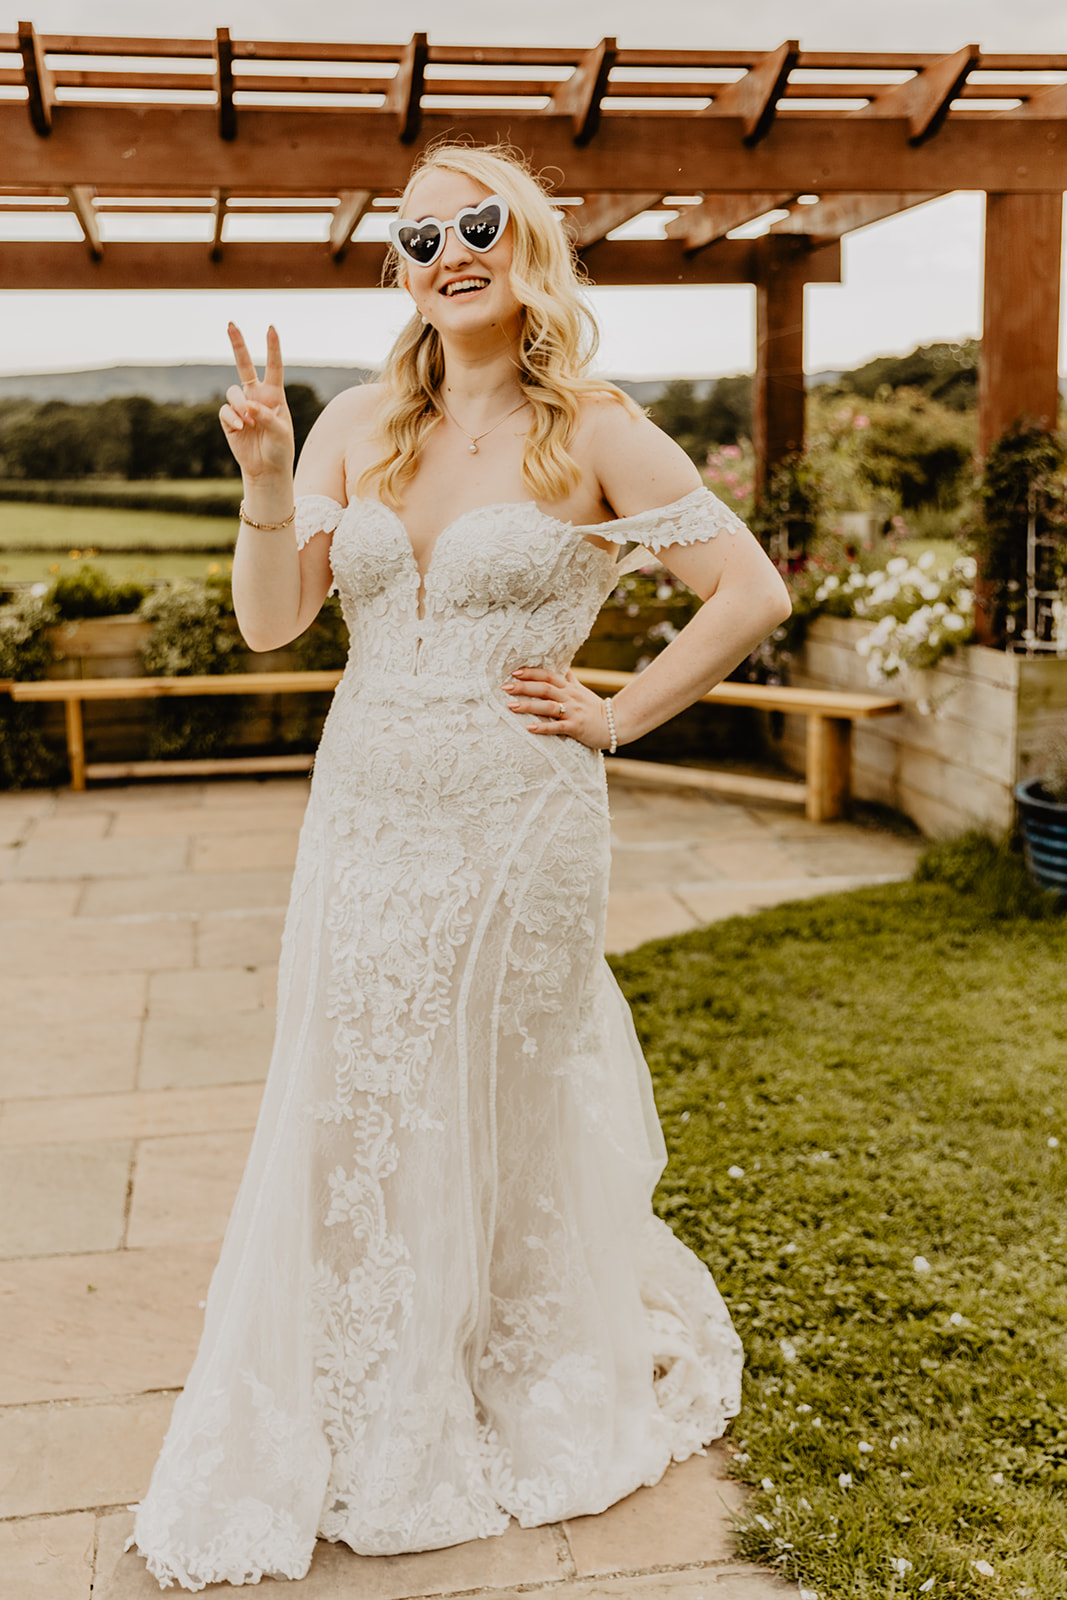 Bride with sunglasses at a Southlands barn wedding, Sussex. Photo by OliveJoy Photography.